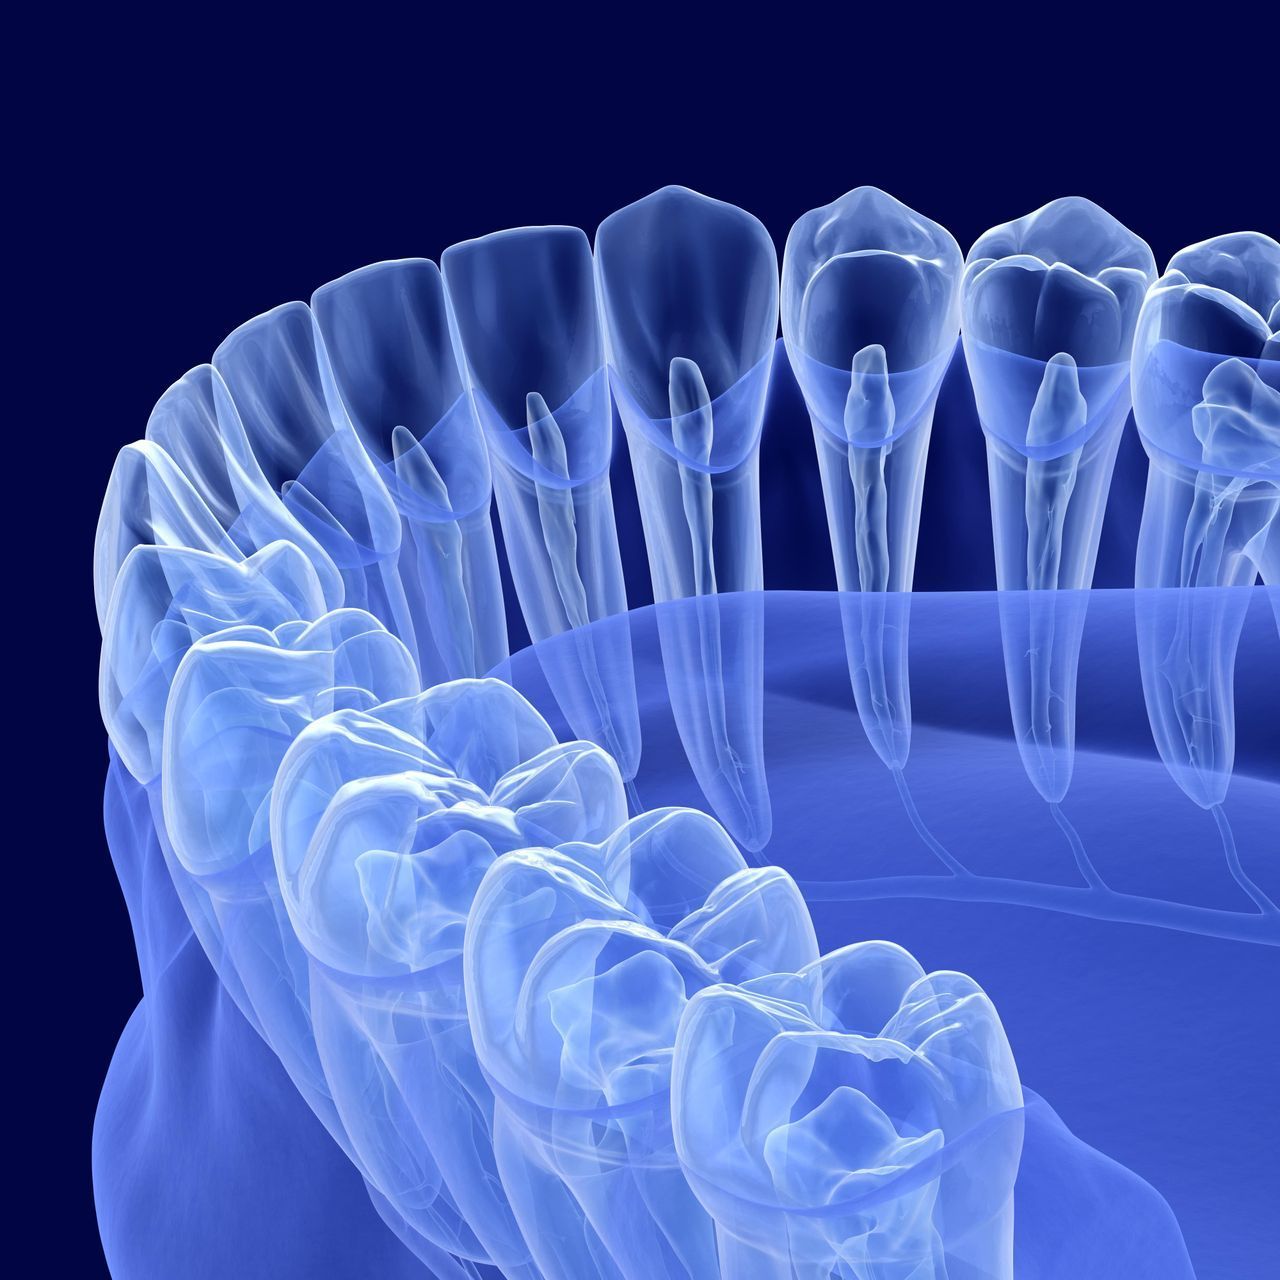 A computer generated image of a dental x-ray